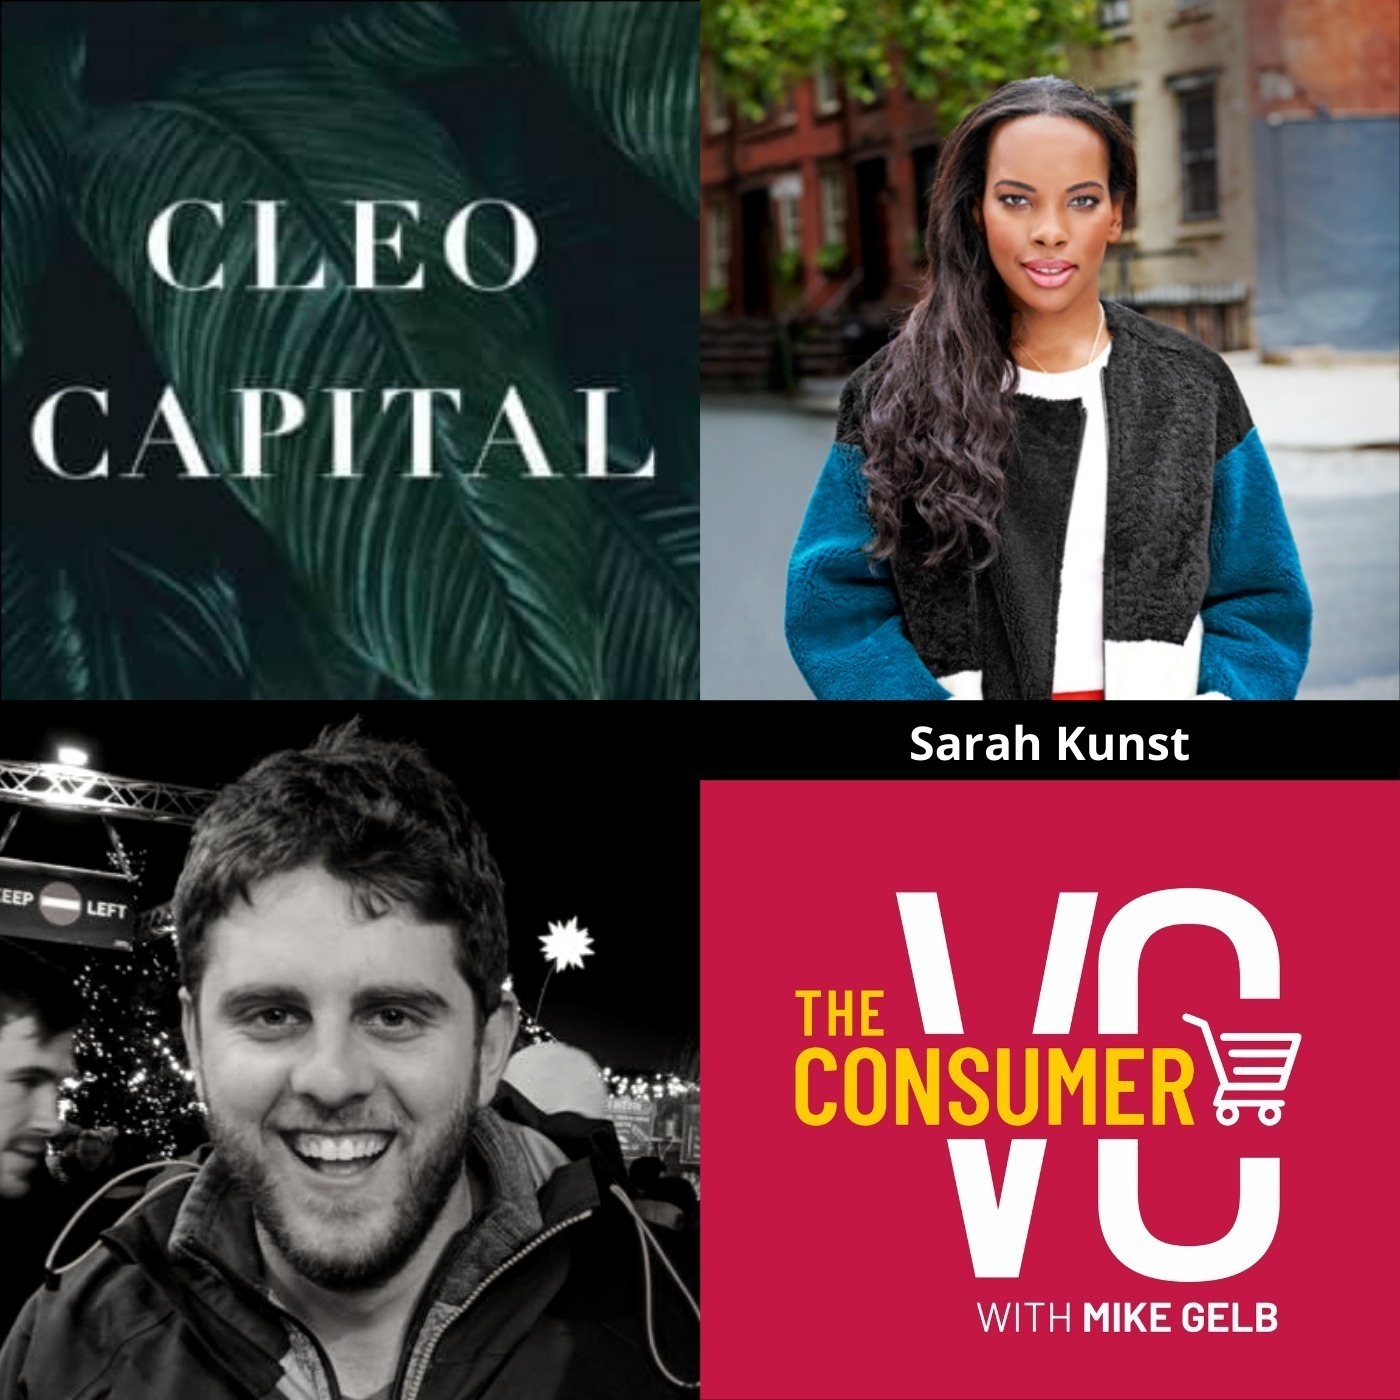 Sarah Kunst (Cleo Capital) - The Future of Work, Complicated Consumer and How to Have a Diverse Portfolio